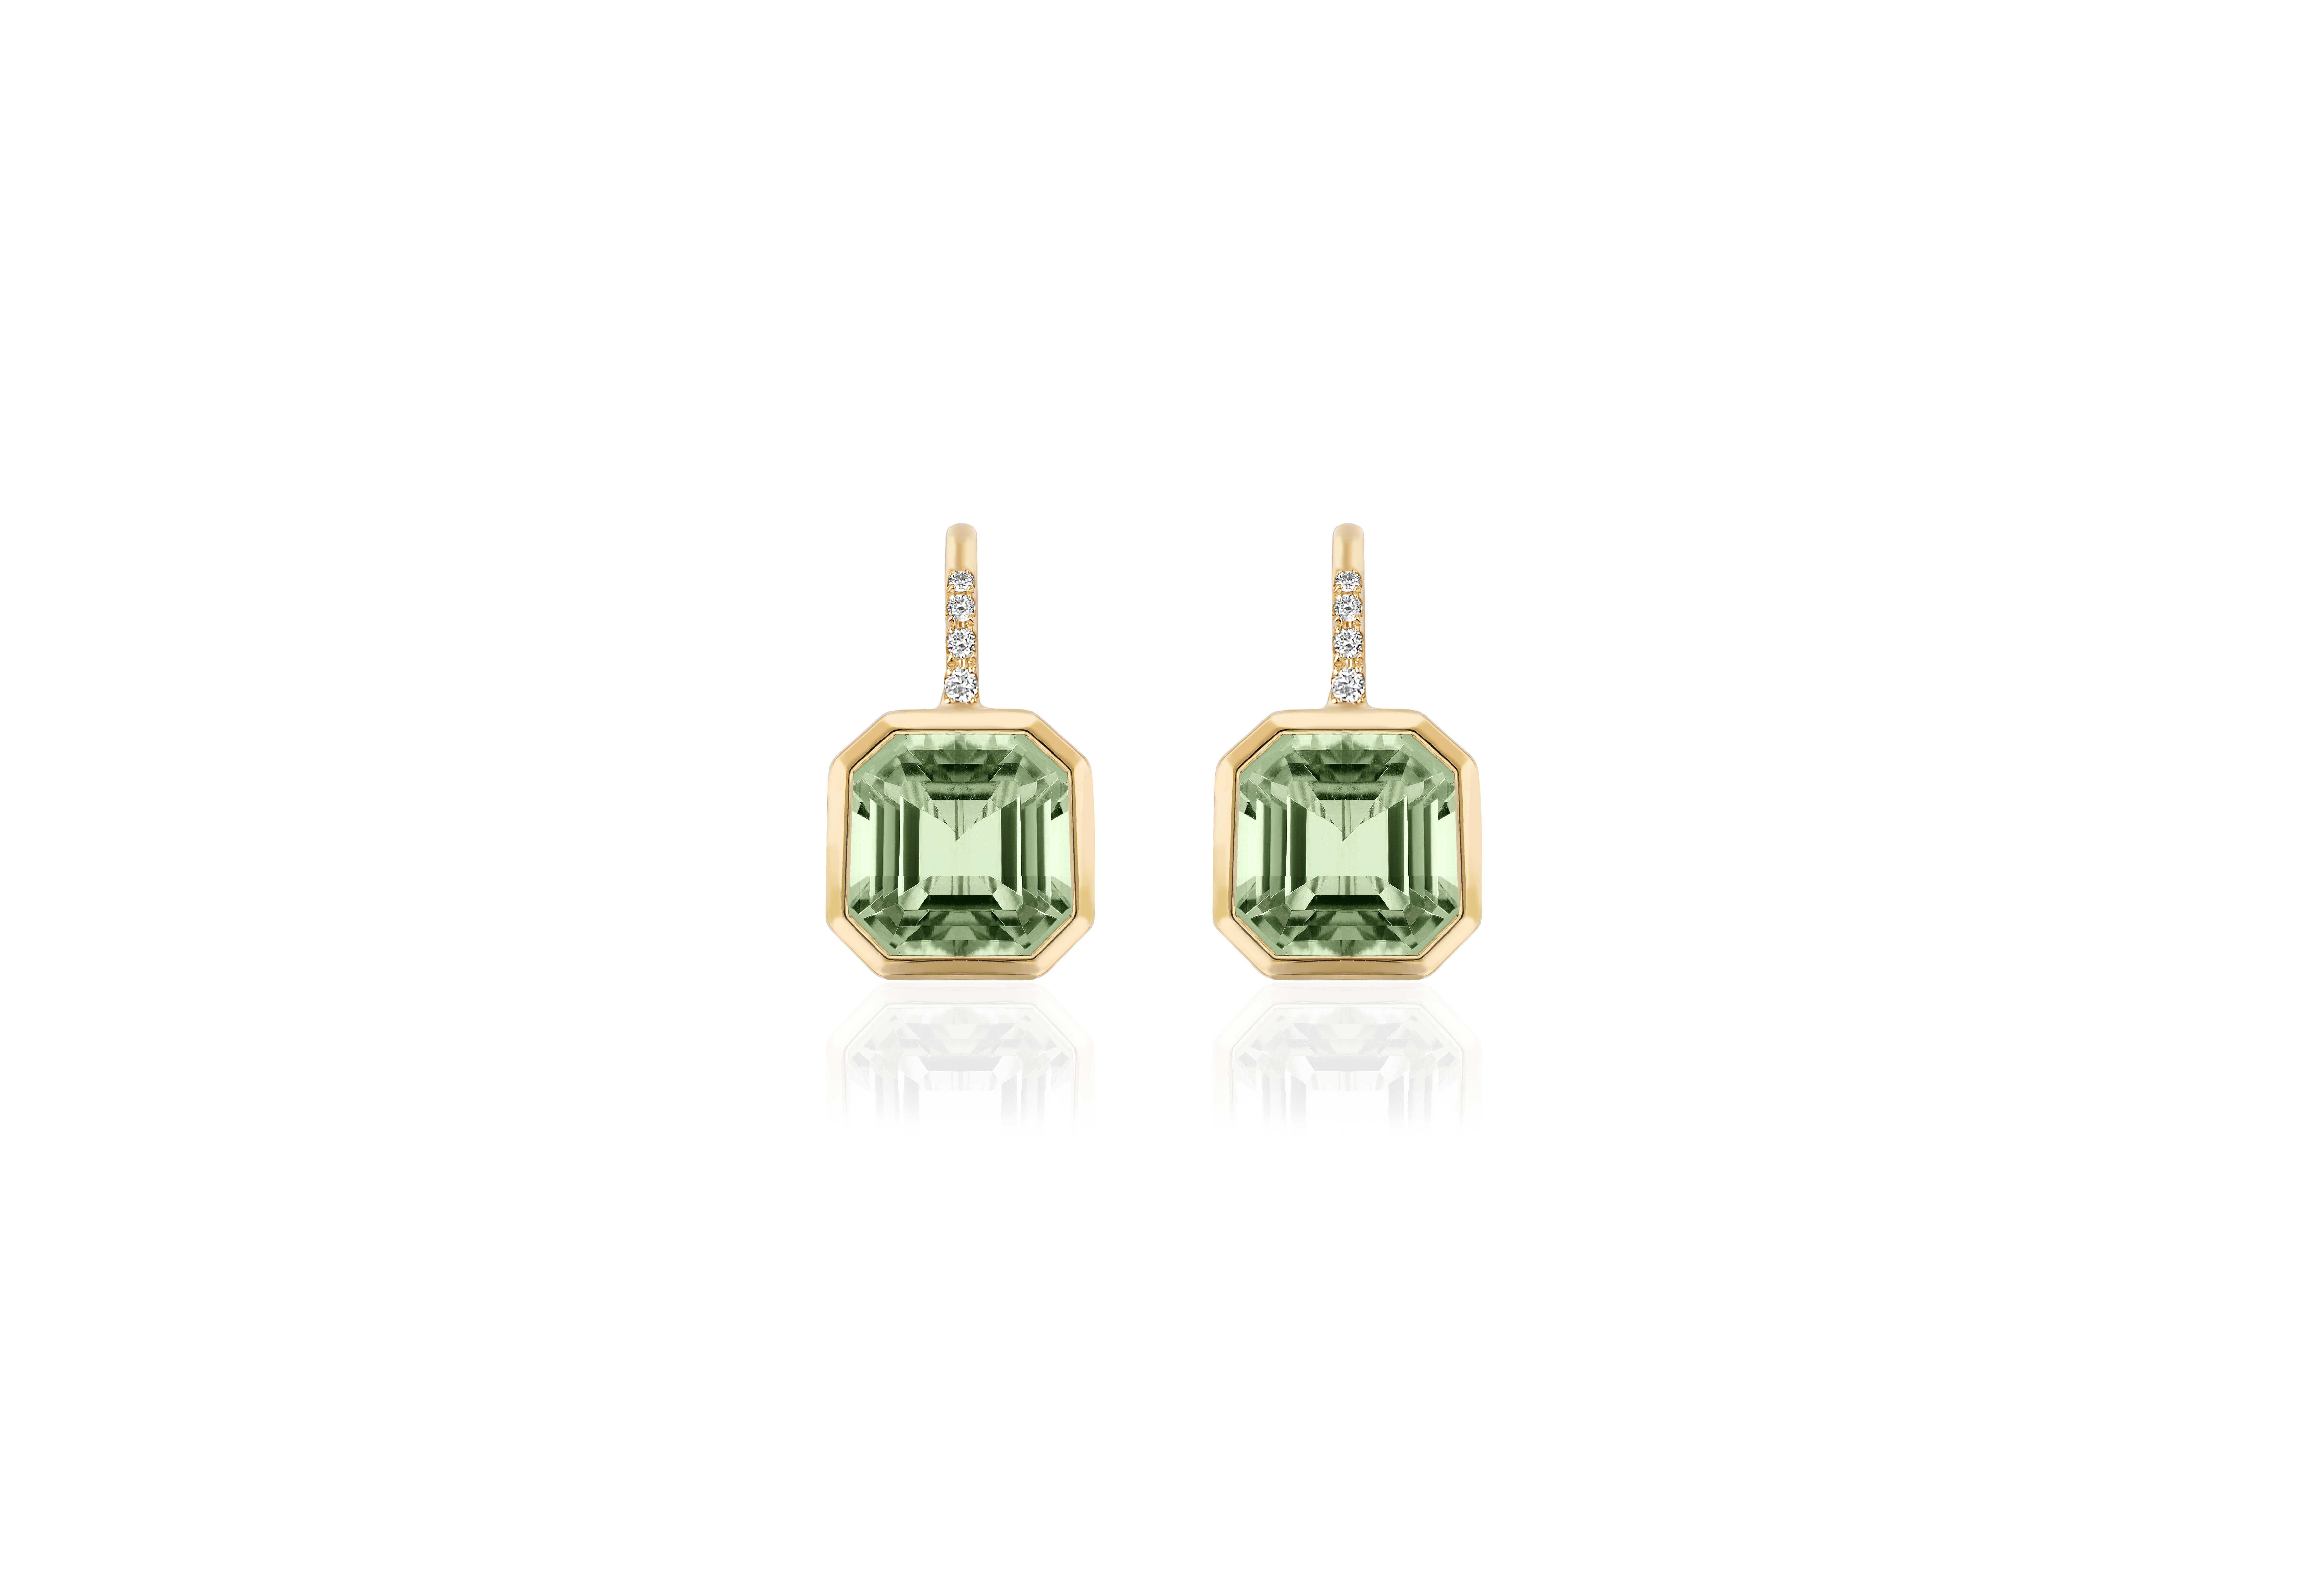 These beautiful earrings in a 9 x 9 mm Asscher cut, which is a  blend of the princess and emerald cuts with X-shaped facets from its corners to its center culet, are made in Prasiolite which is from the Amethyst family. They are set on wire with 4